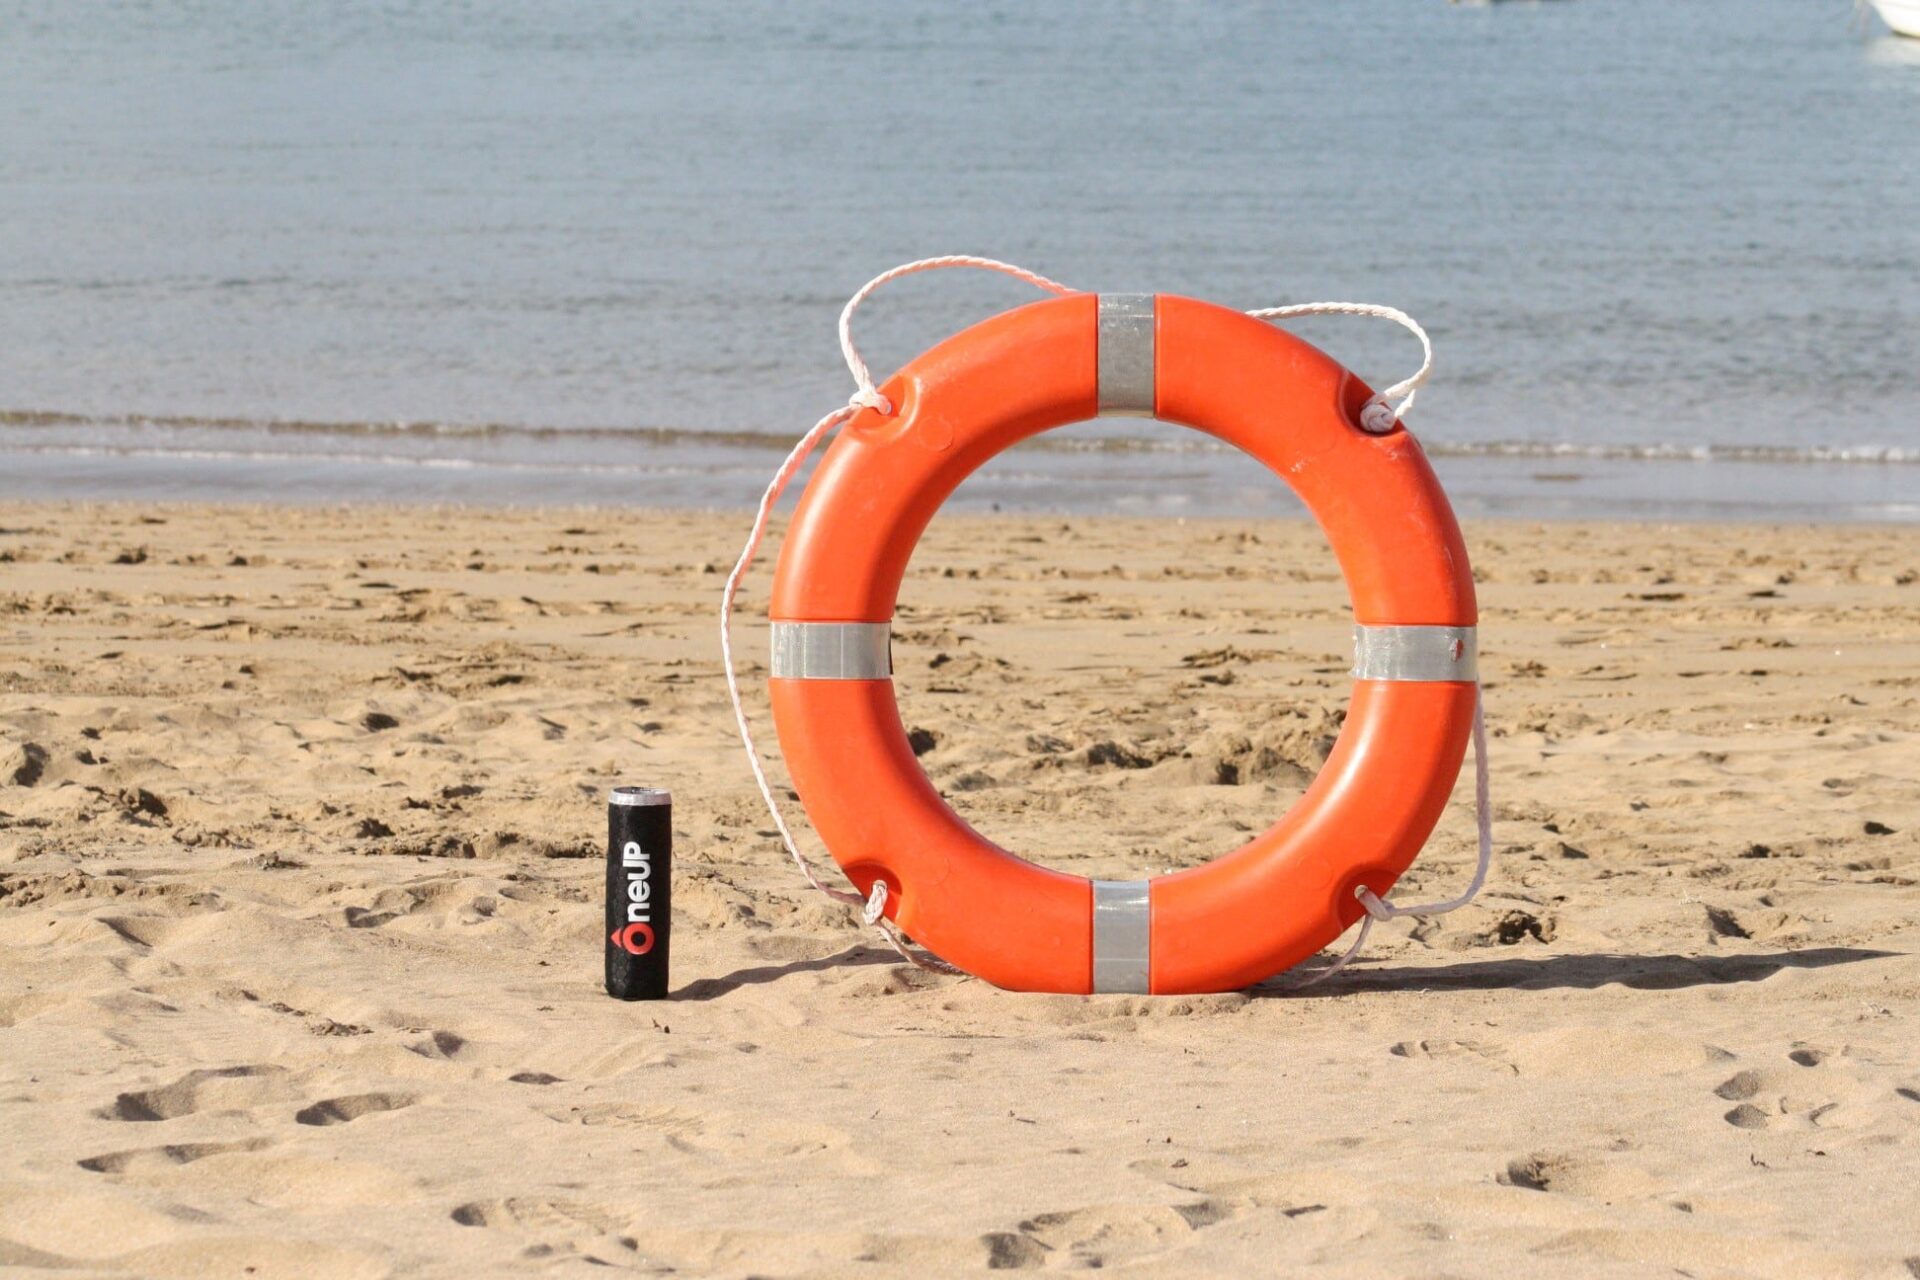 OneUp has created a self-inflating life preserver that may bring peace of mind as you boat, play at the beach and in your pool